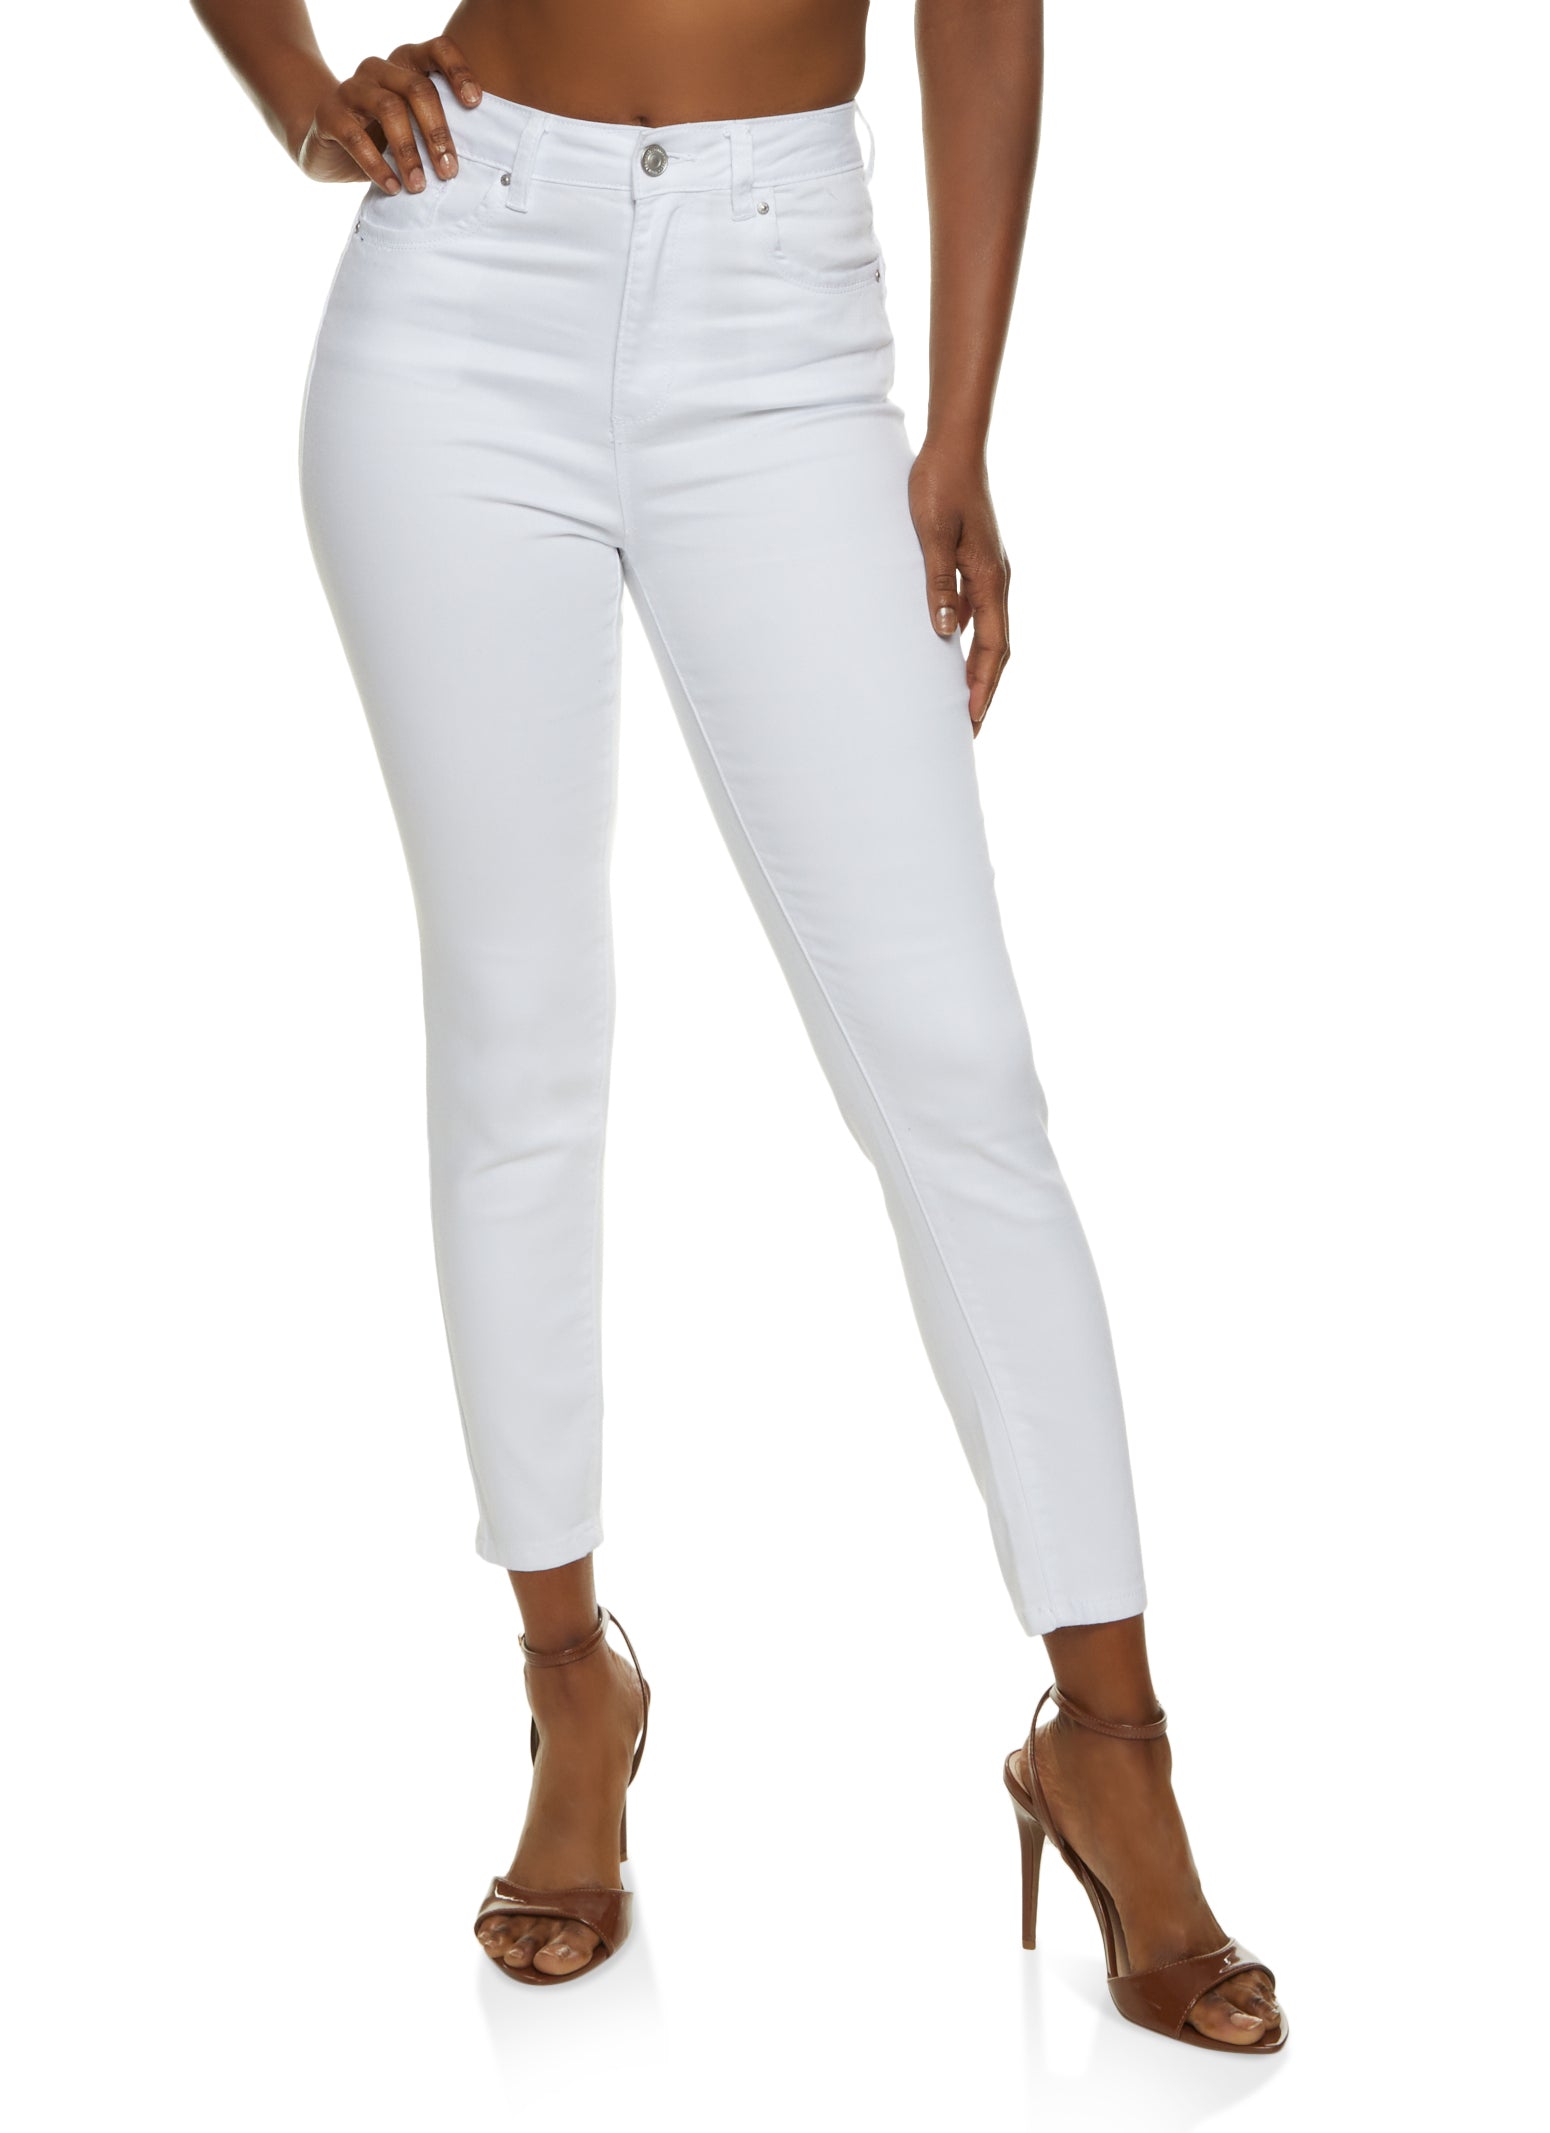 WAX Solid High Waisted Skinny Jeans